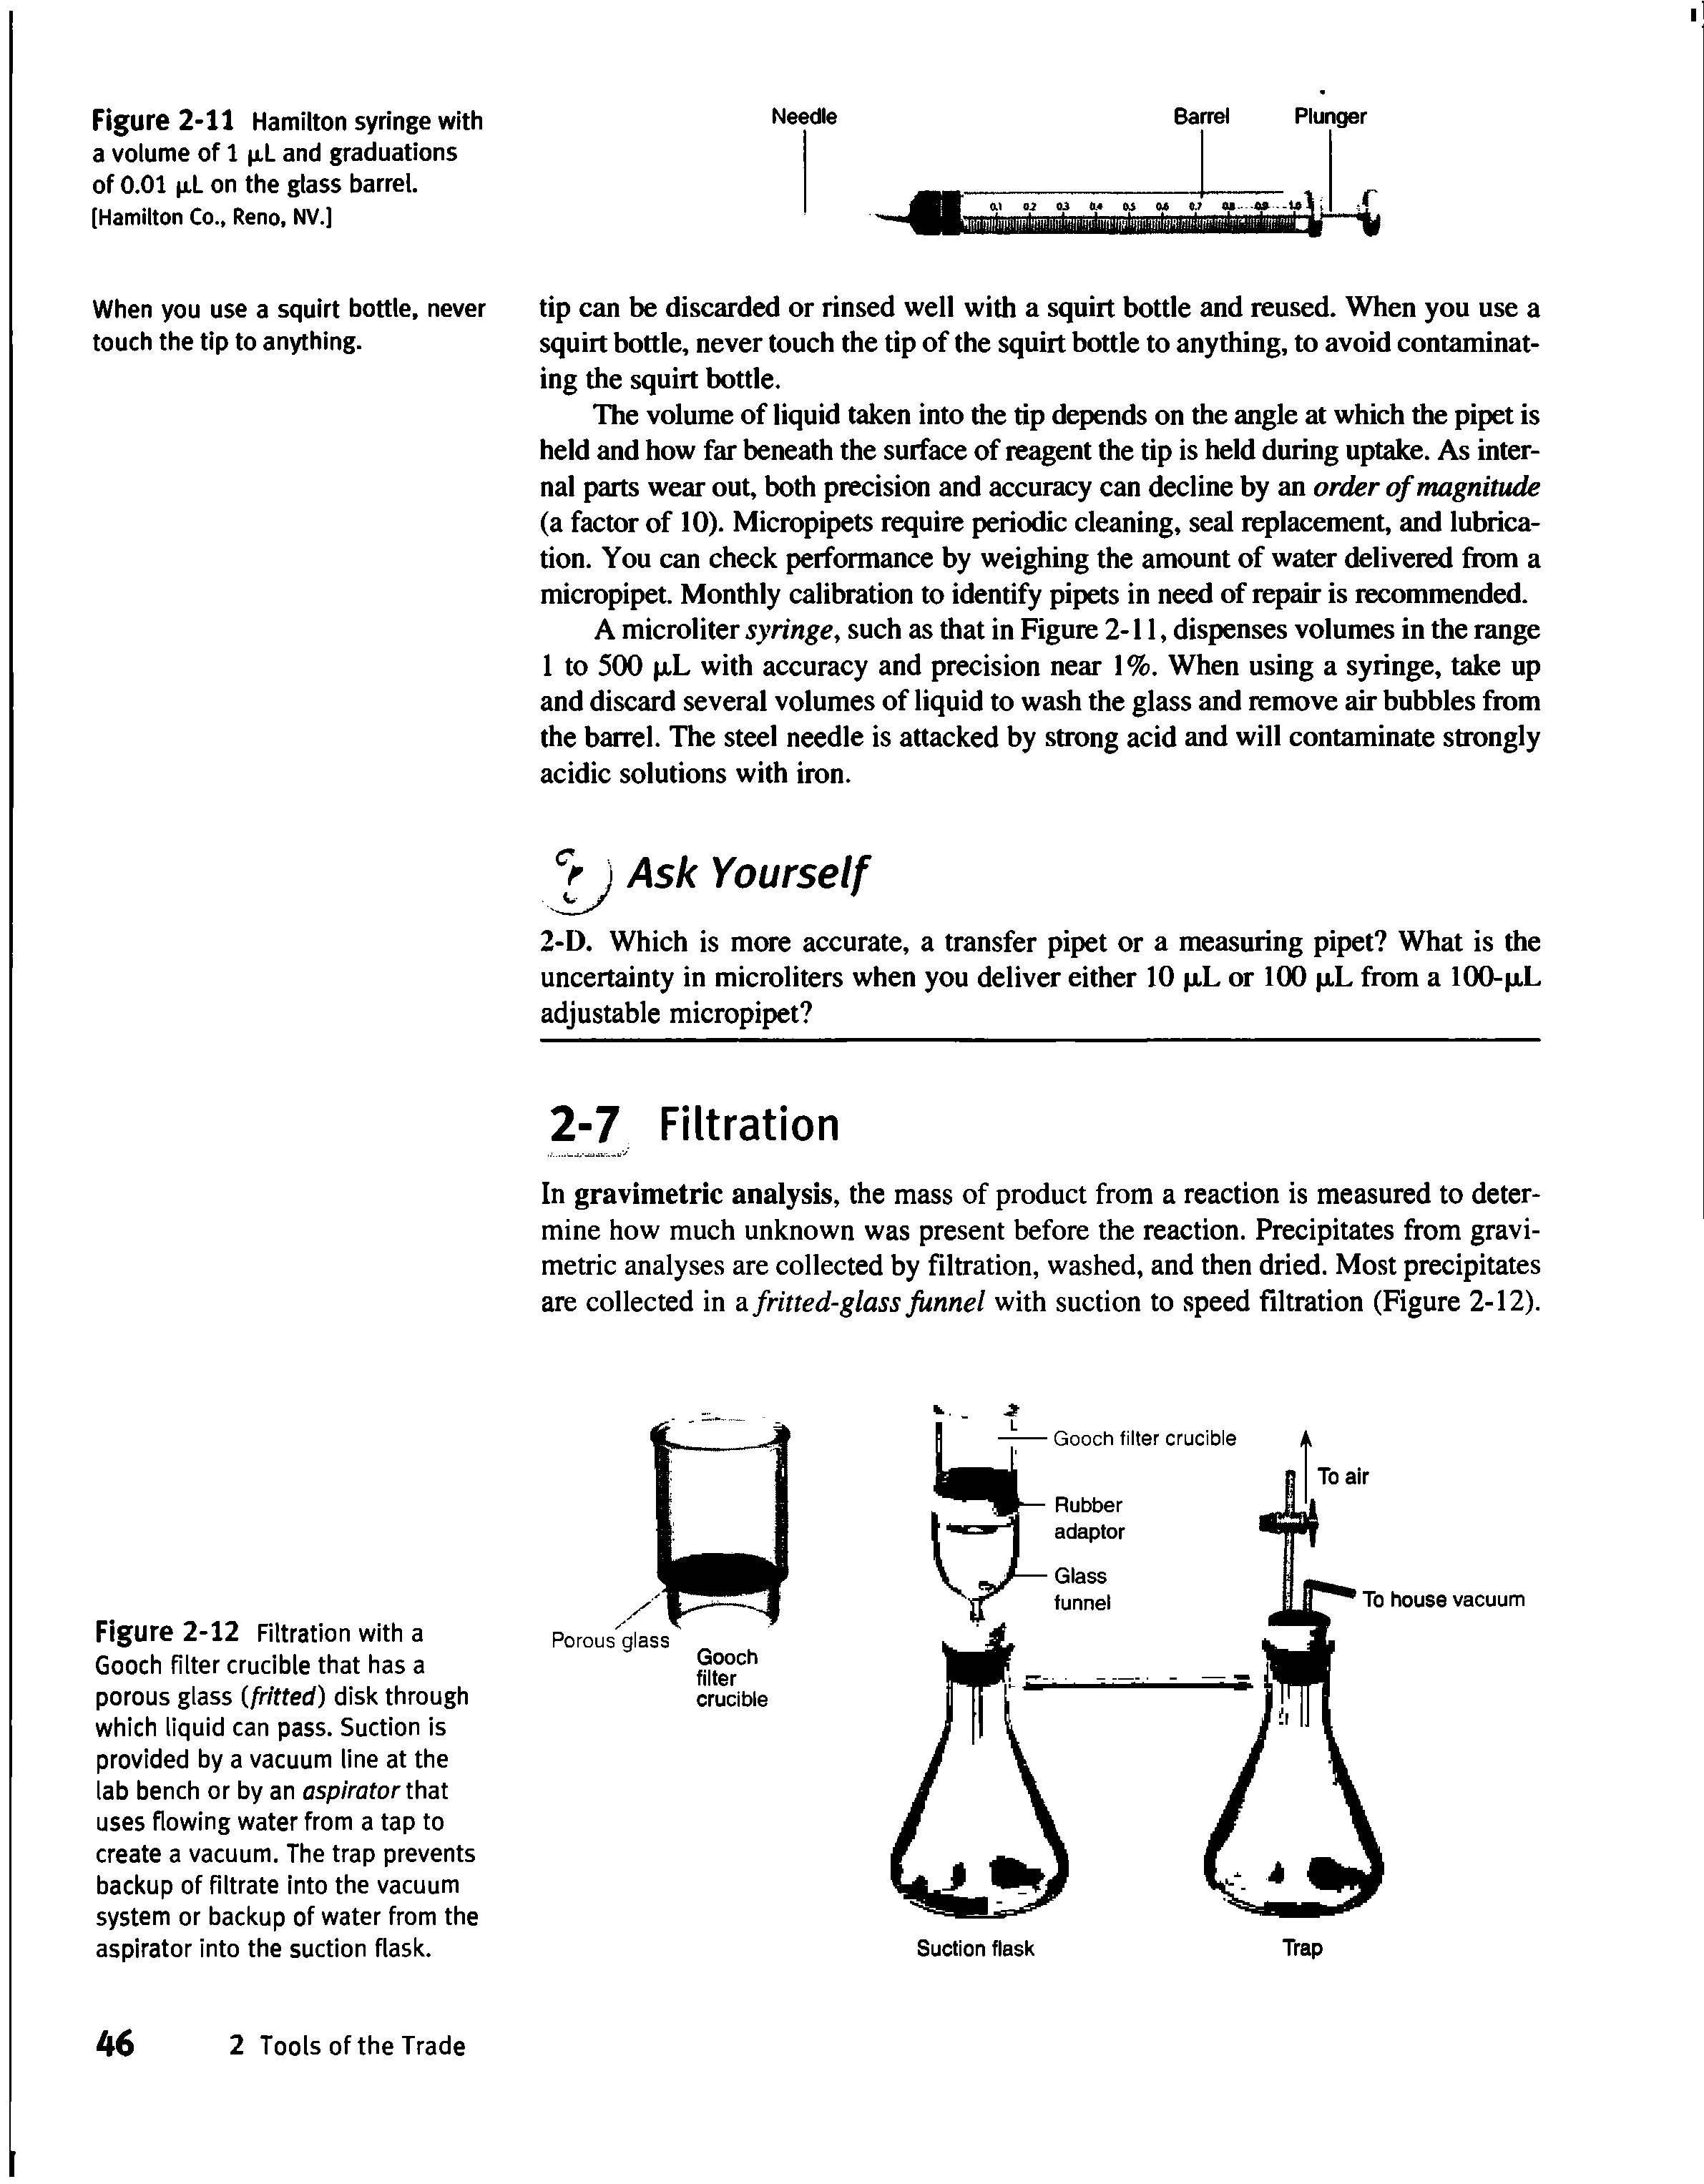 Figure 2-12 Filtration with a Gooch filter crucible that has a porous glass (fritted) disk through which liquid can pass. Suction is provided by a vacuum line at the lab bench or by an aspirator that uses flowing water from a tap to create a vacuum. The trap prevents backup of filtrate into the vacuum system or backup of water from the aspirator into the suction flask.